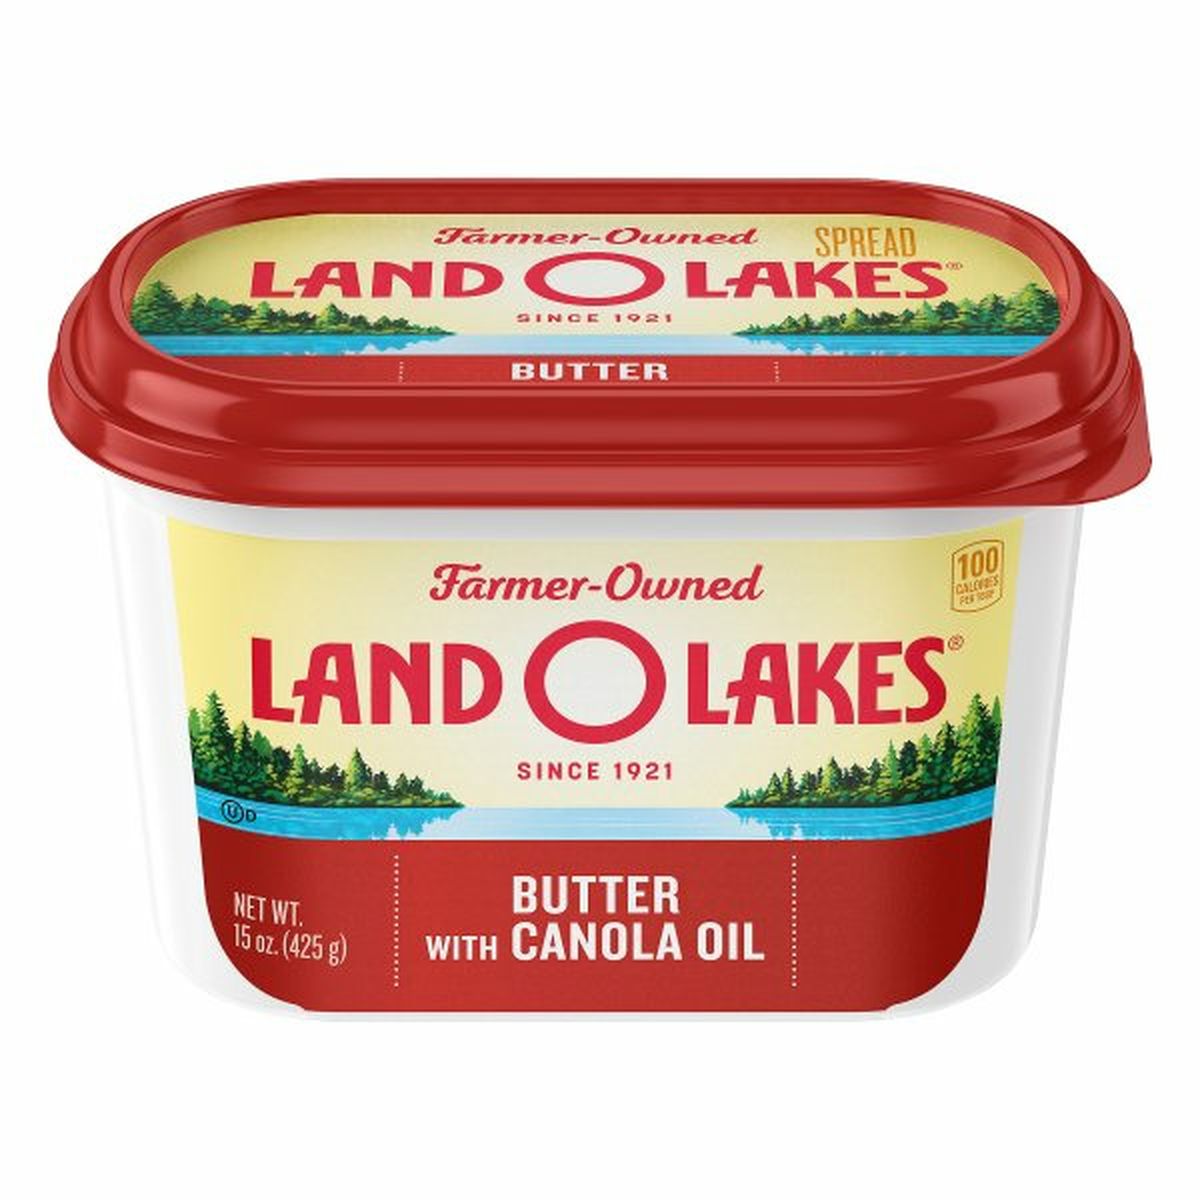 Calories in Land O Lakes Butter with Canola Oil